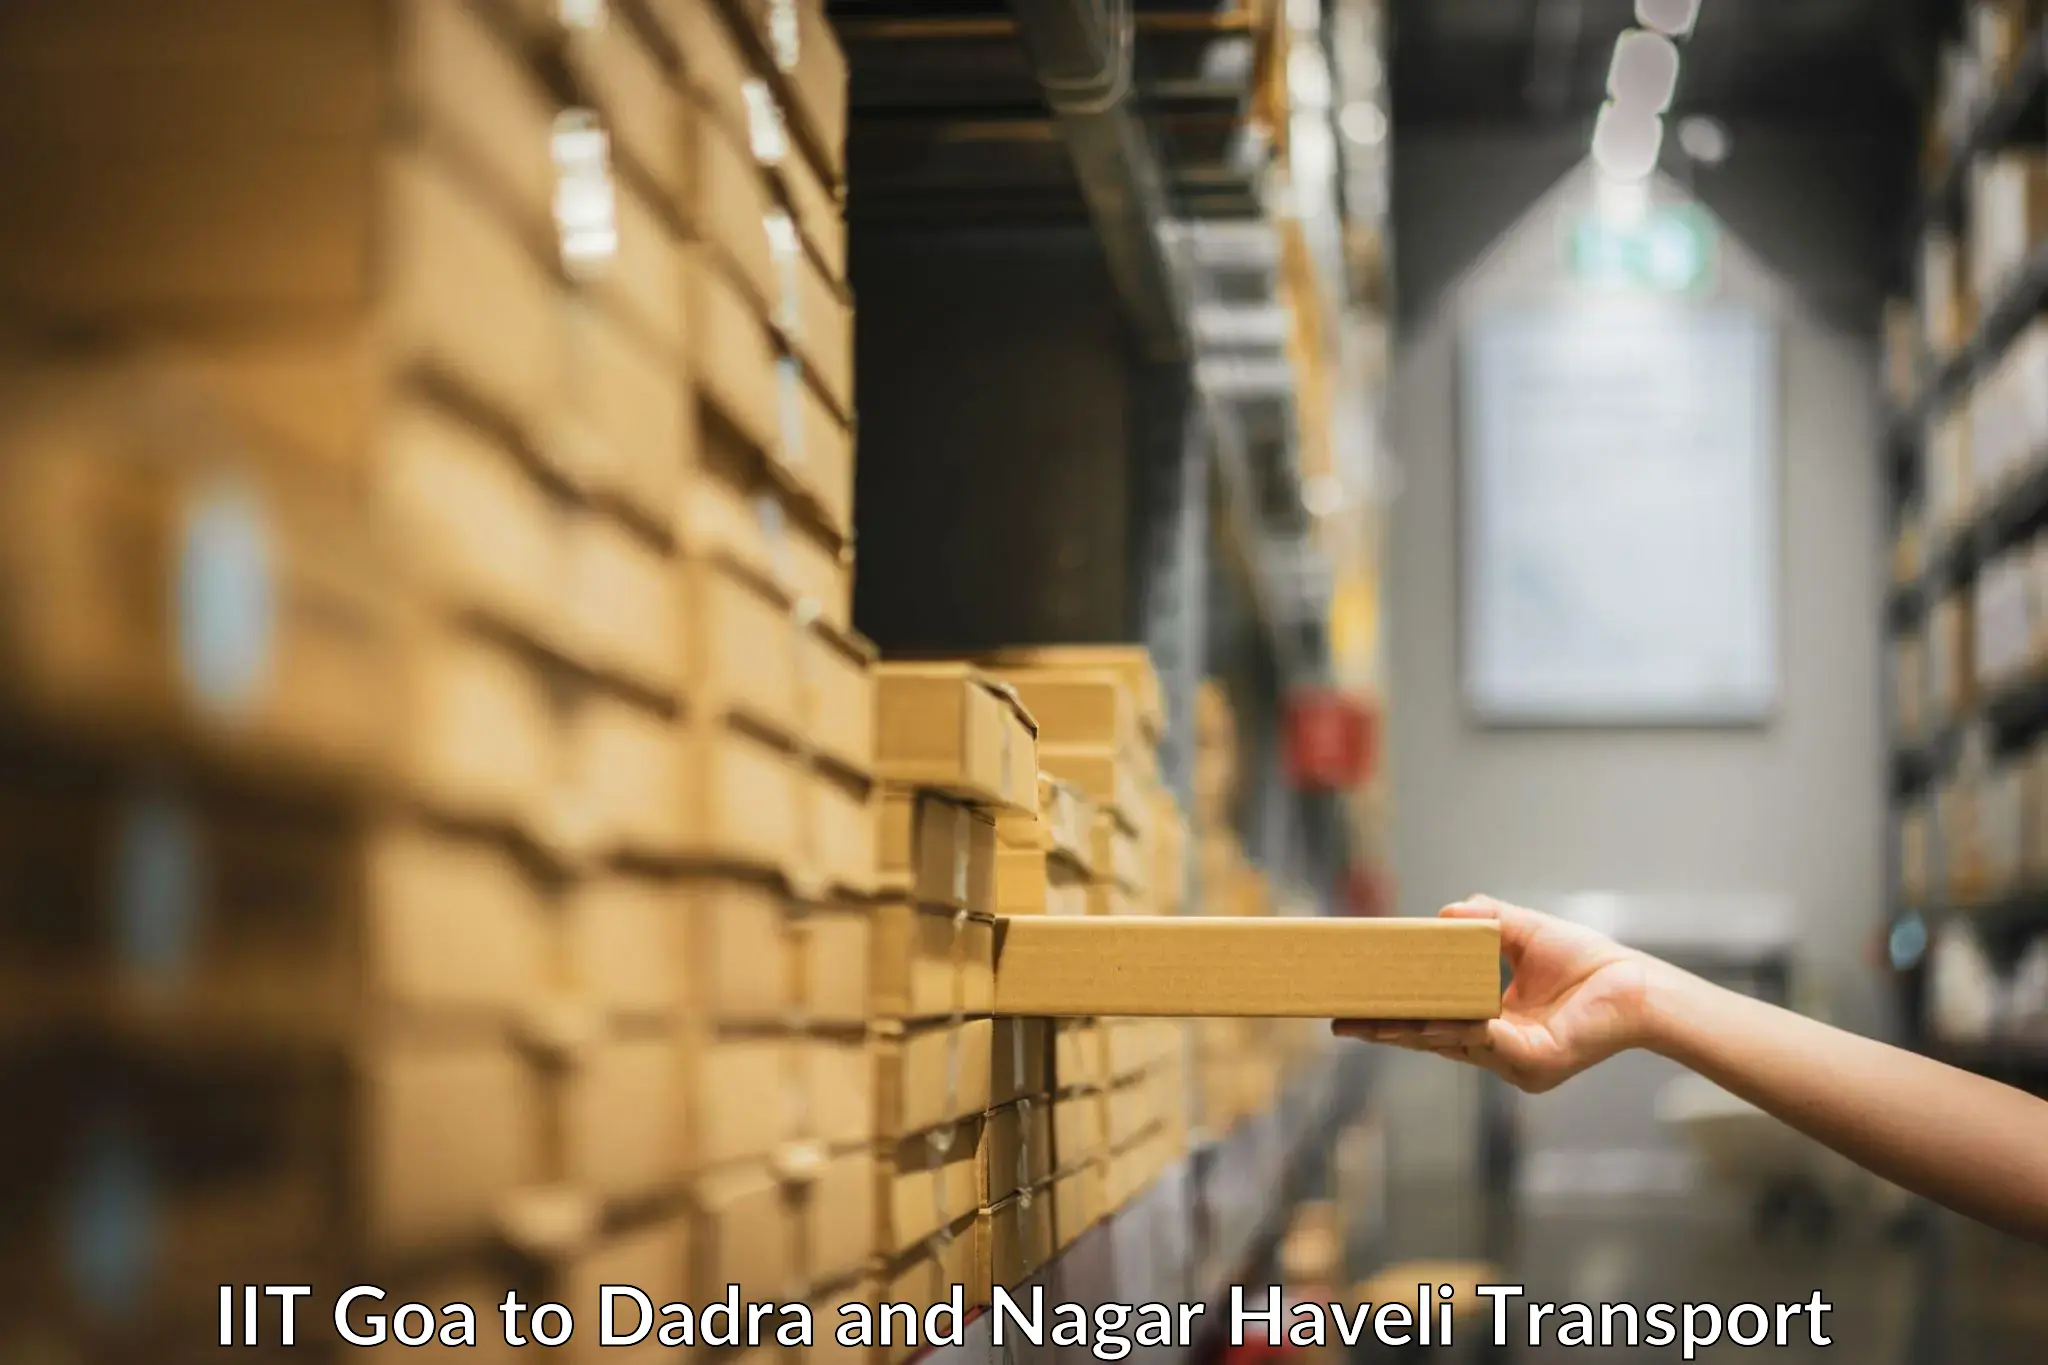 Container transport service IIT Goa to Dadra and Nagar Haveli